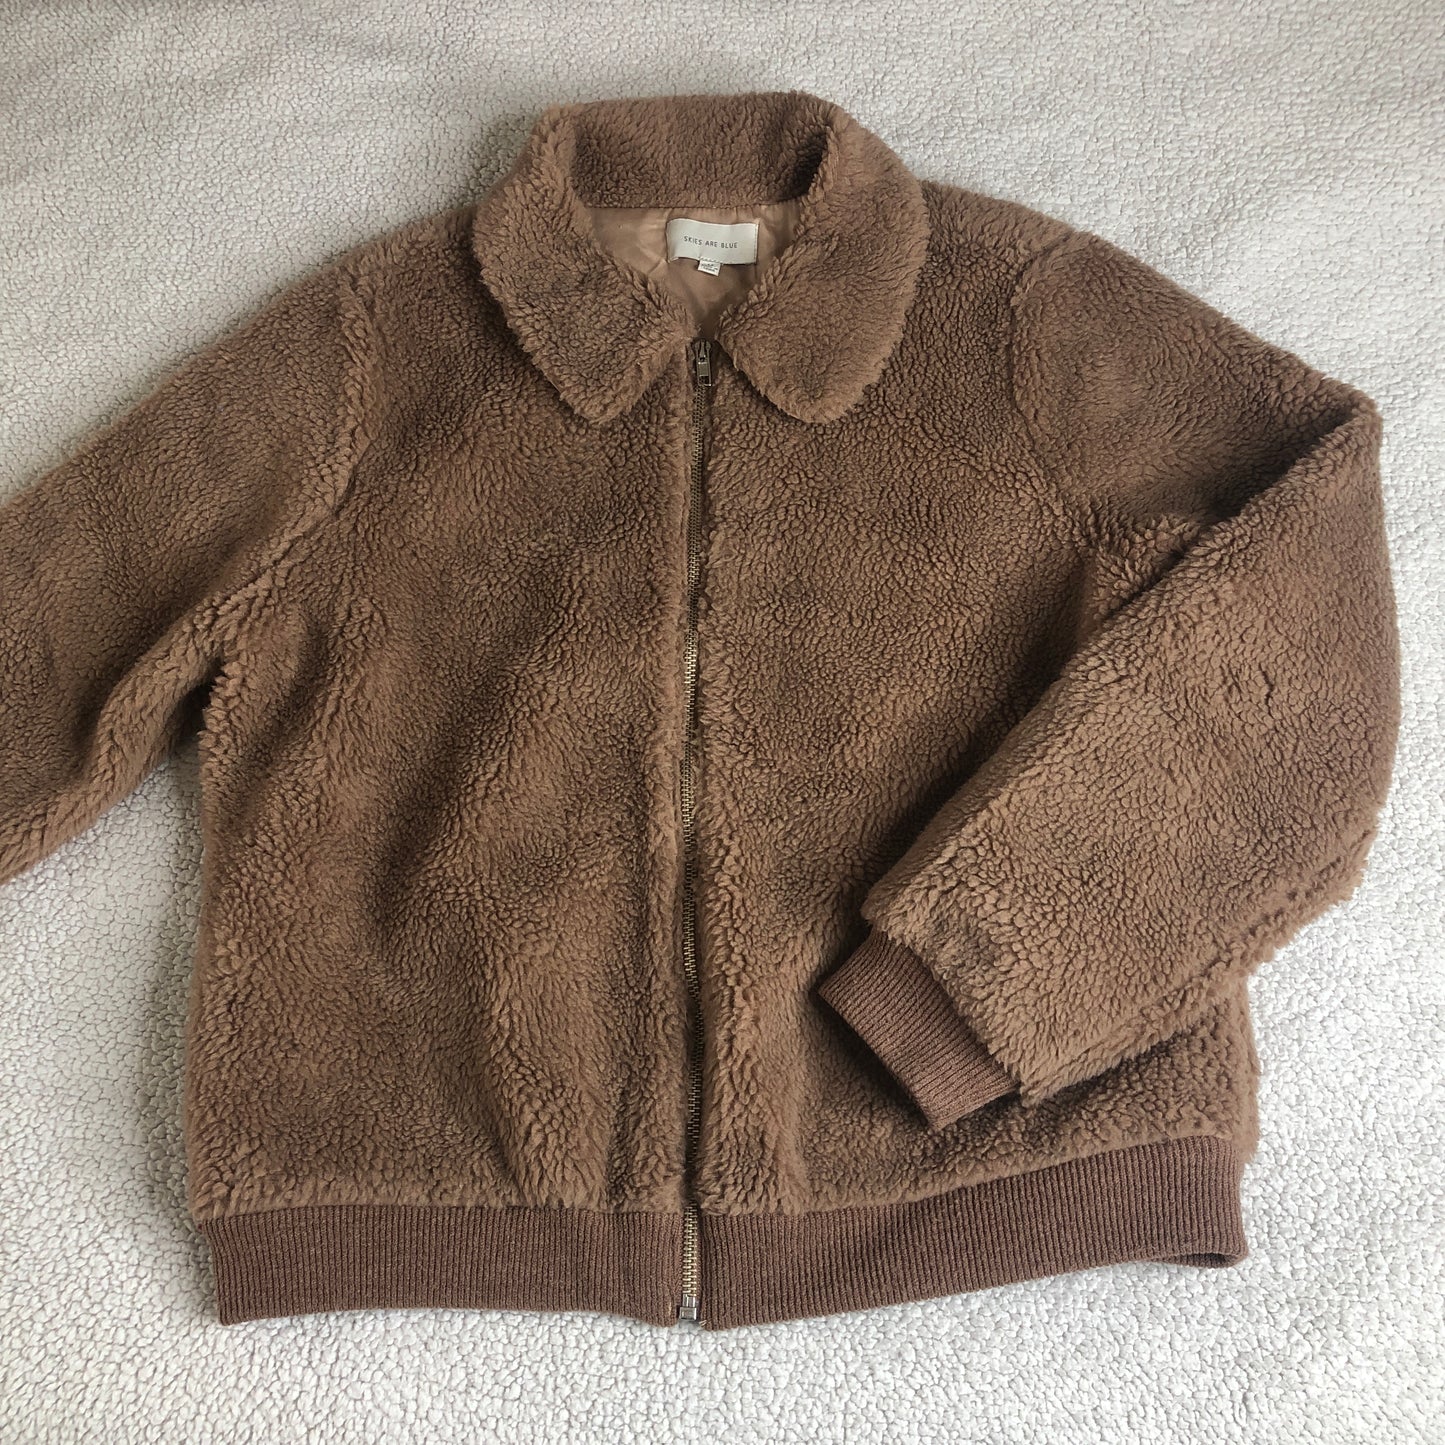 Skies Are Blue brown sherpa teddy fuzzy collared zip up jacket